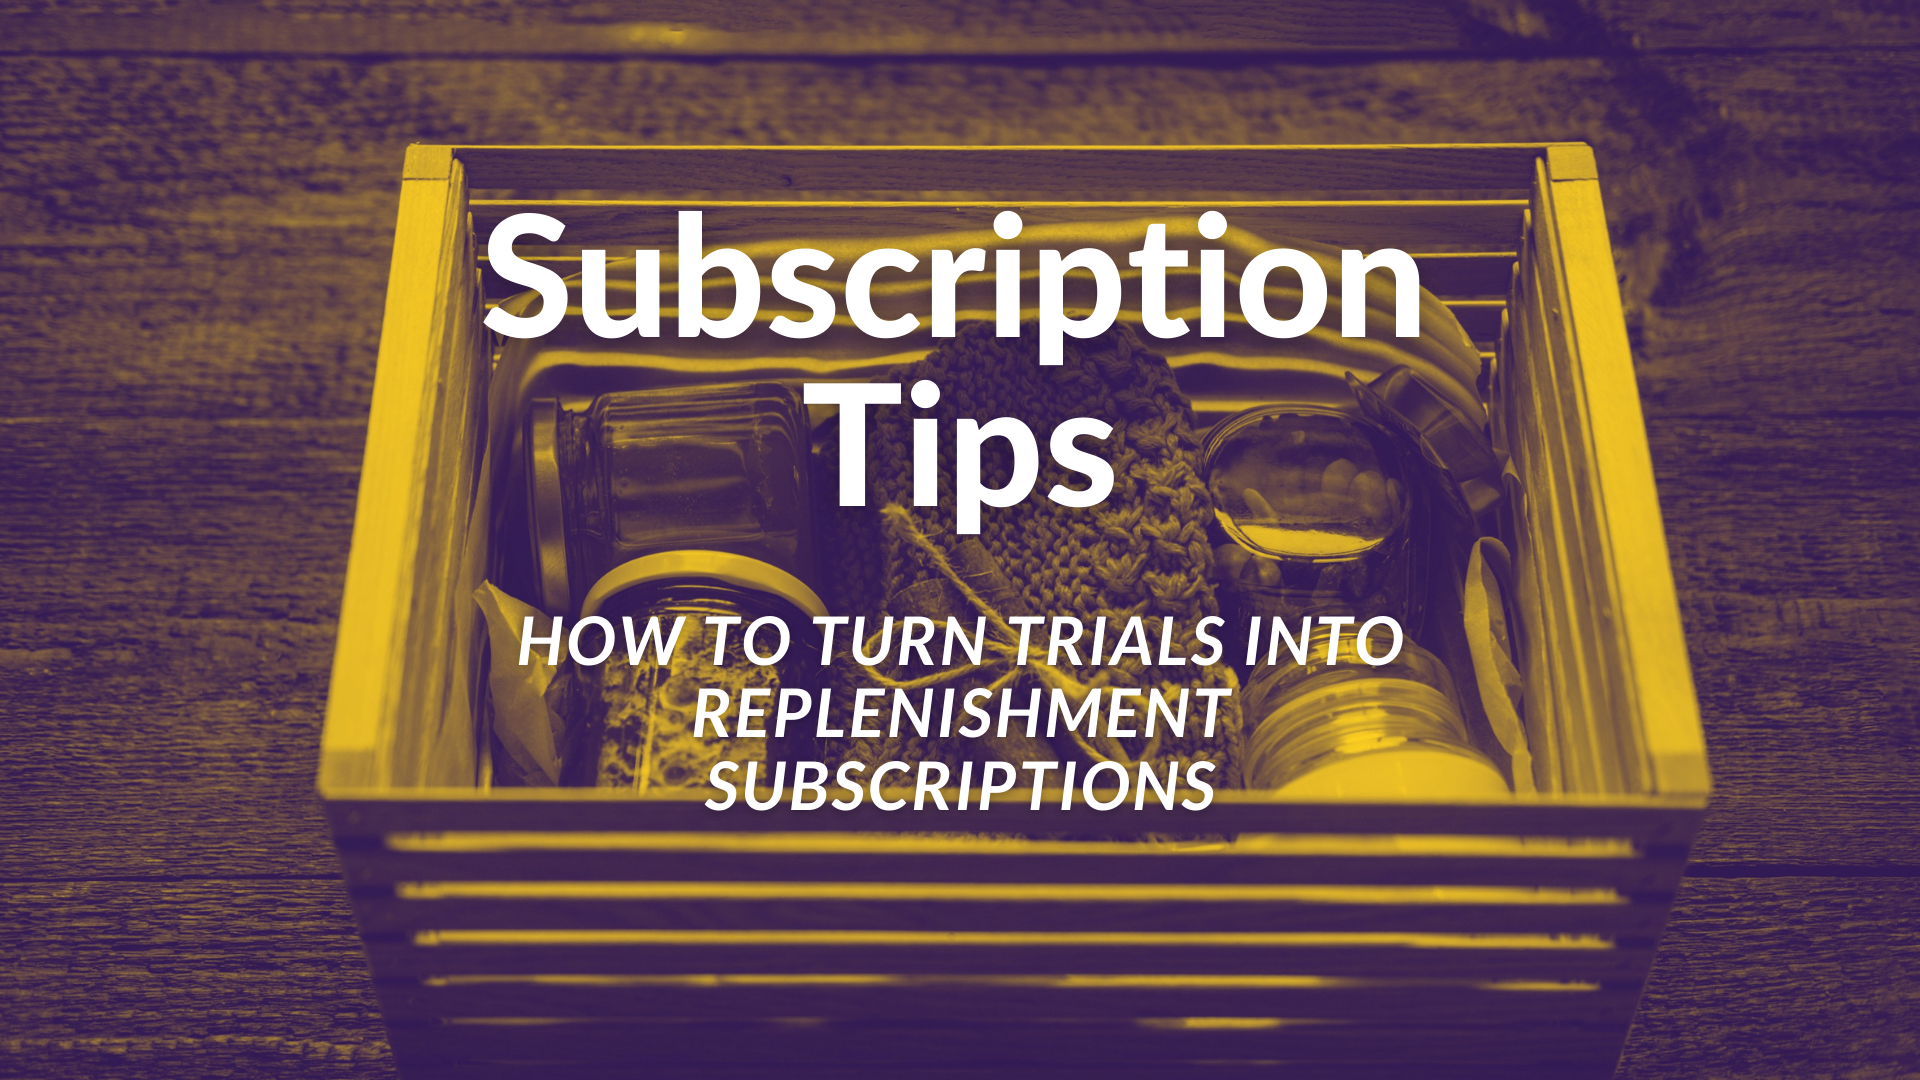 "Subscription Tips: How to turn trials into replenishment subscriptions" over an image of a box filled with items